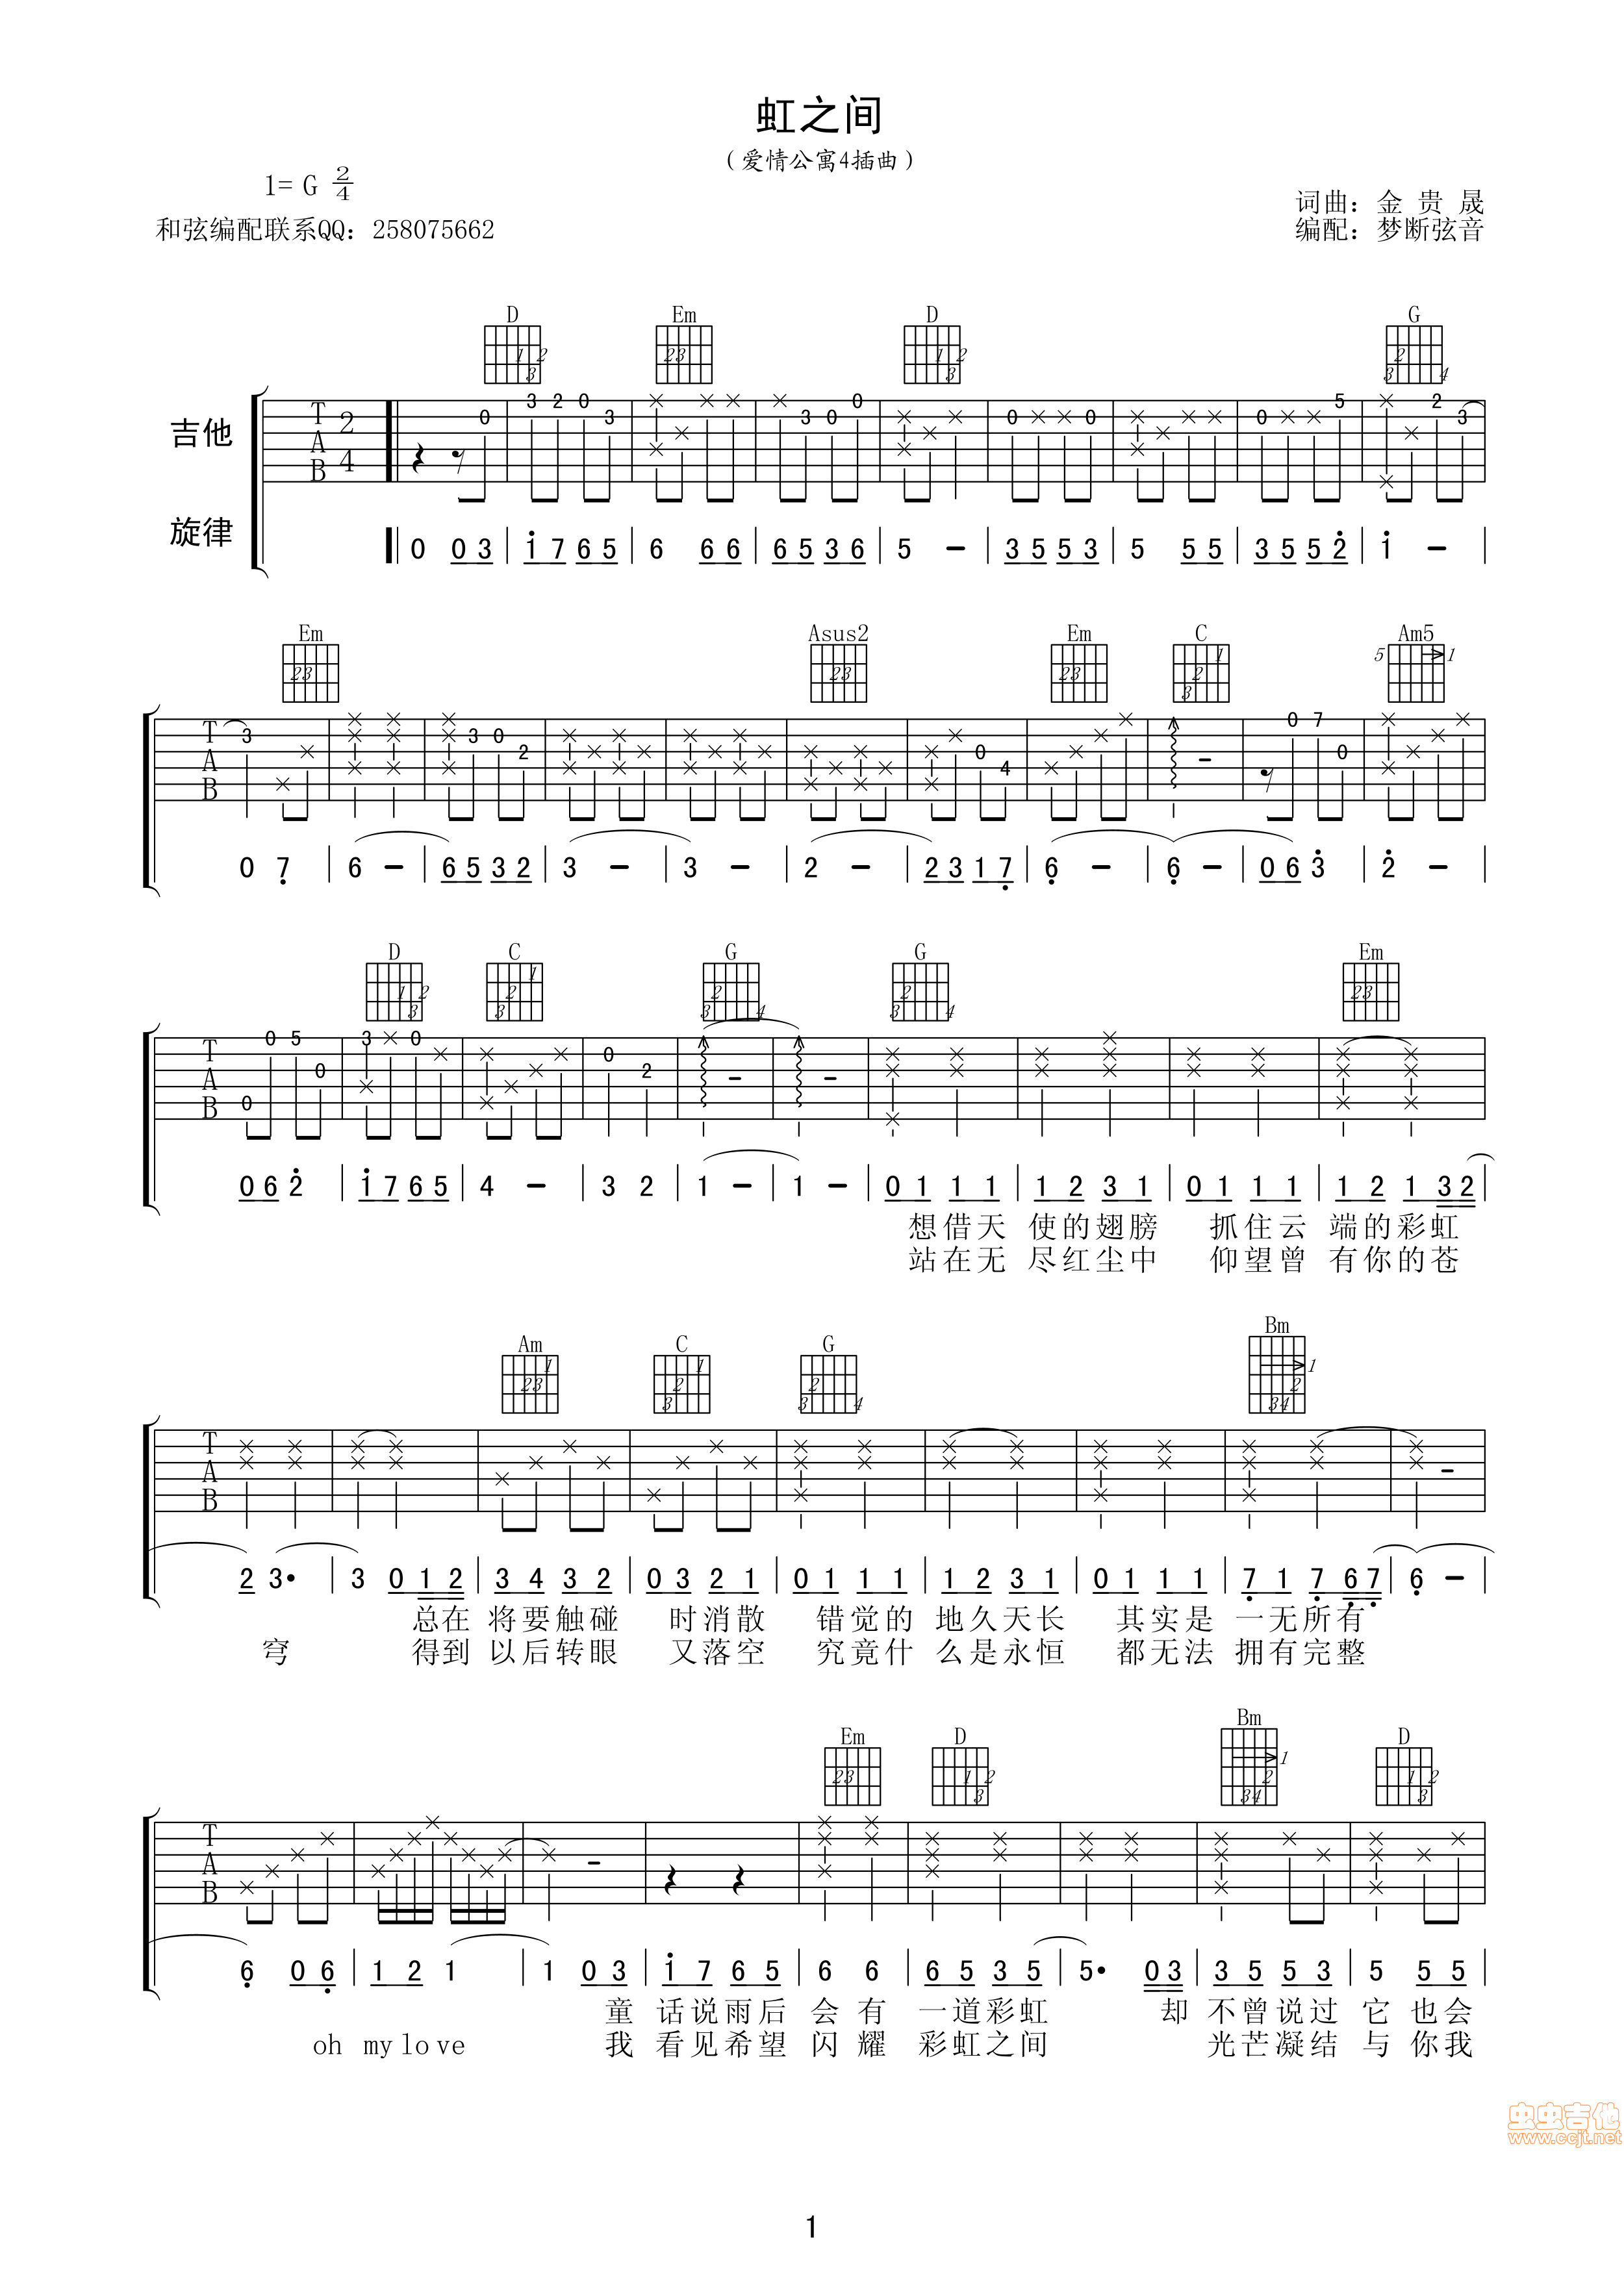 Iron Maiden "Dance Of Death" Sheet Music Notes | Download Printable PDF ...